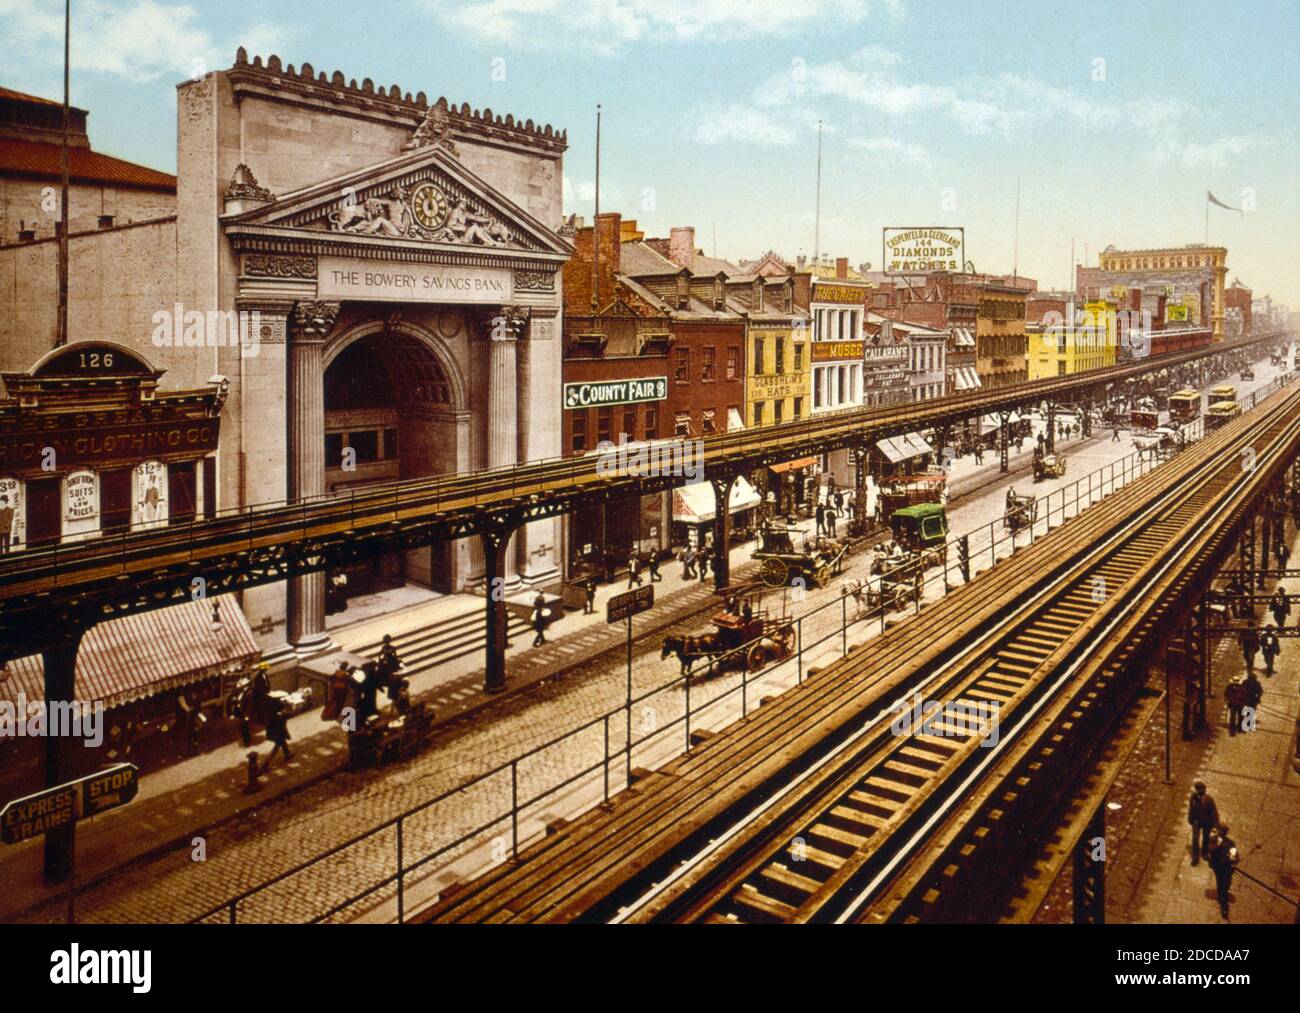 Third Avenue El, The Bowery, New York, c. 1900 Banque D'Images